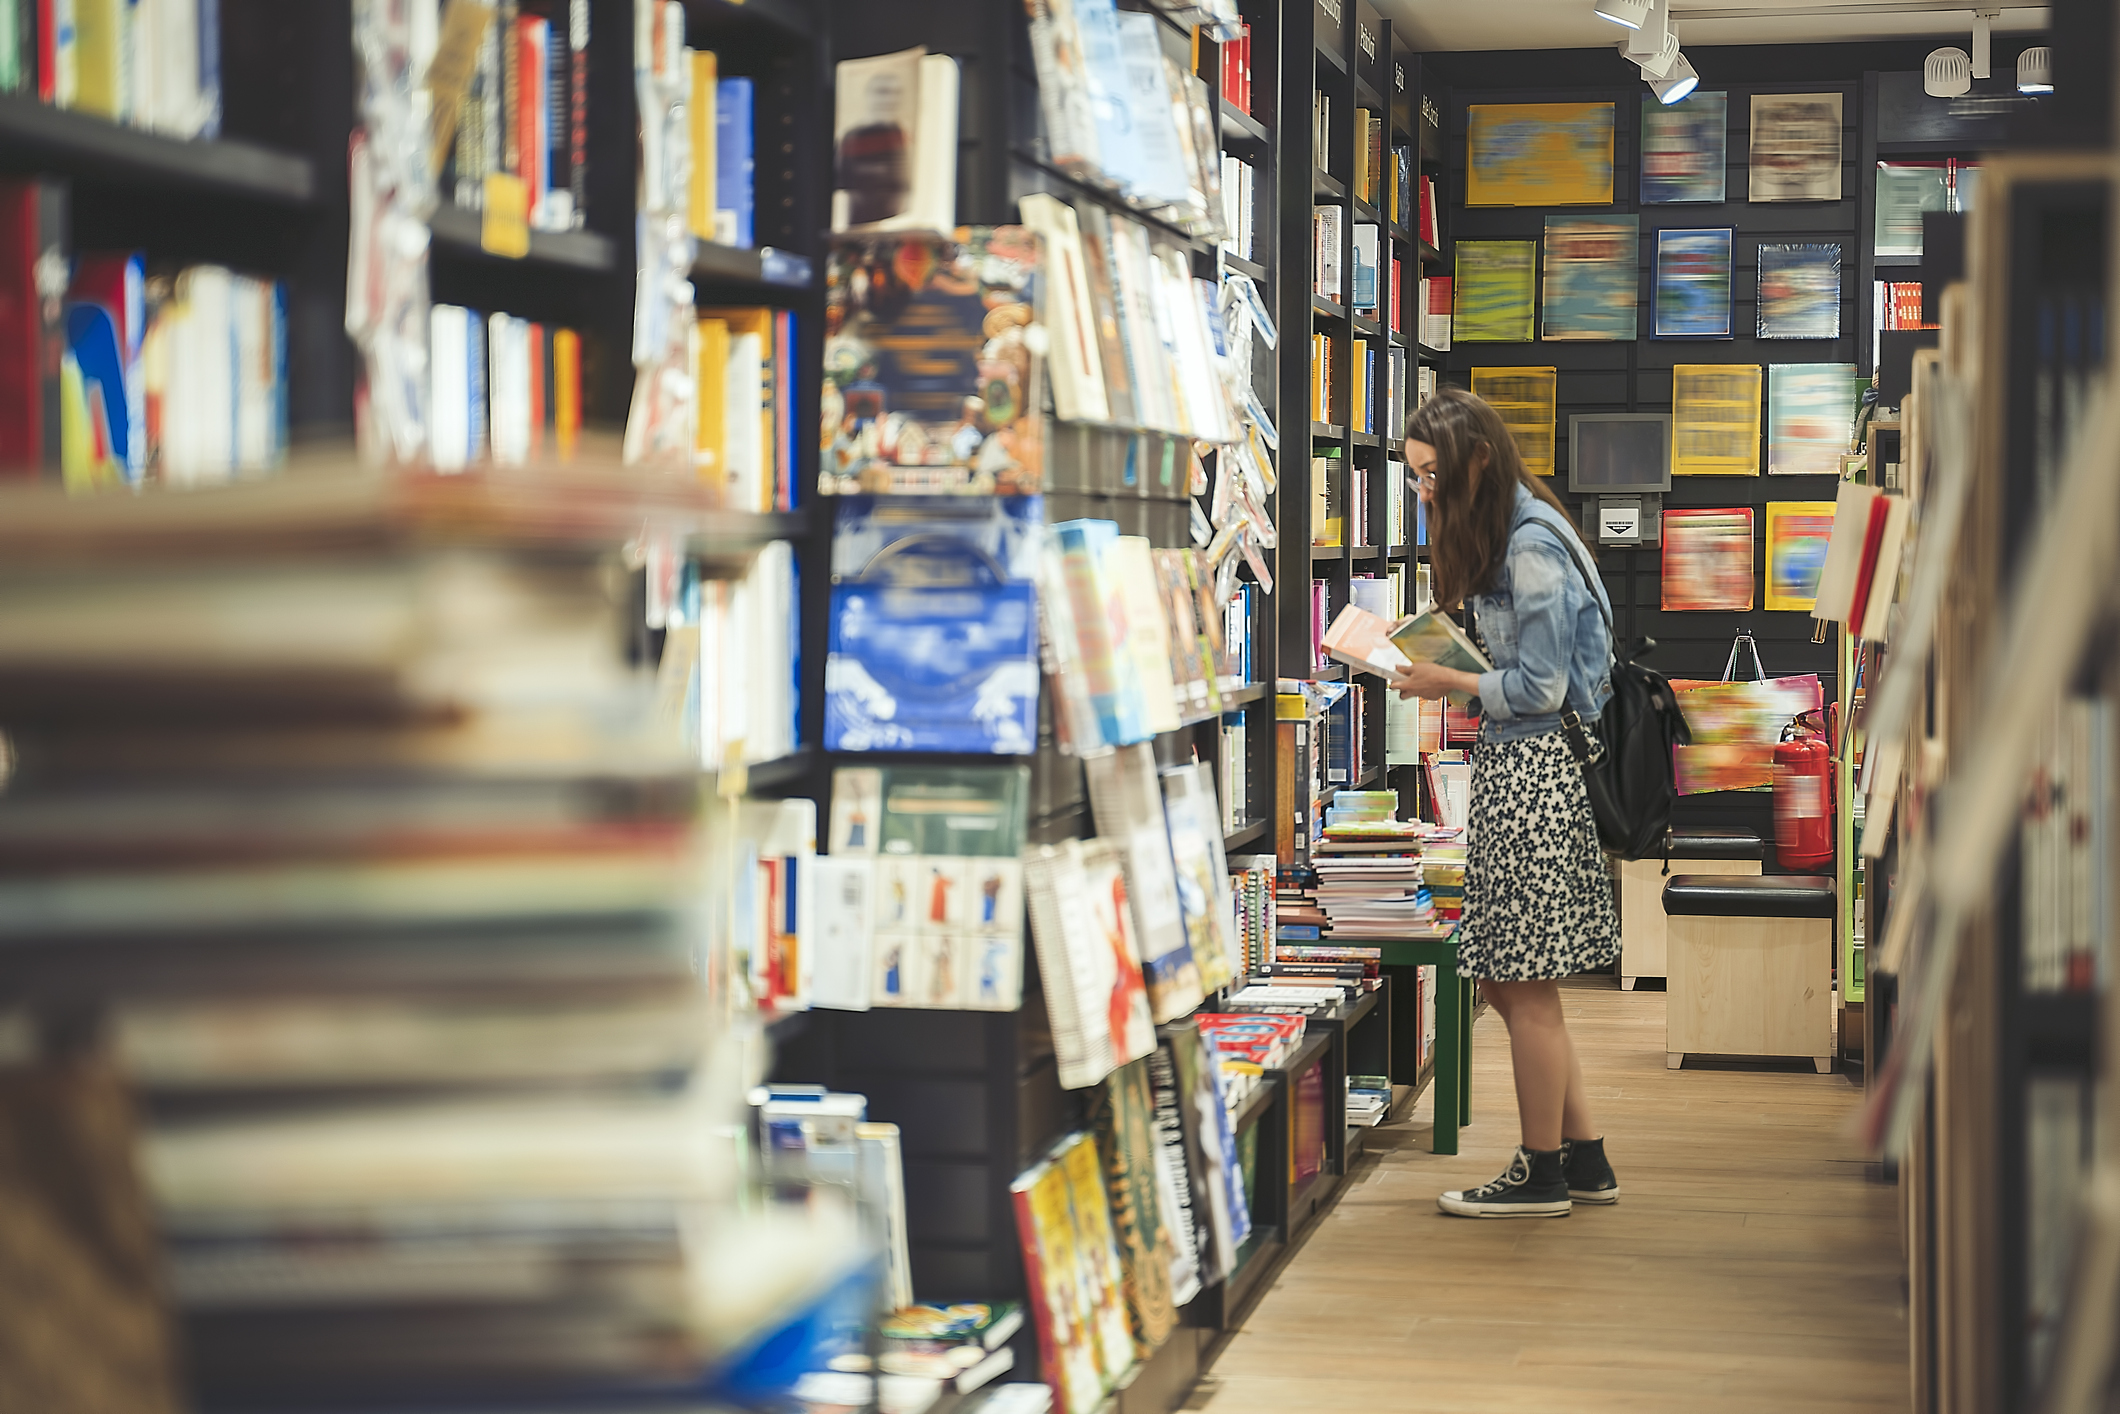 Aussie Book Store Issues Apology After “Pick Up Artists” Caught Harassing Customers